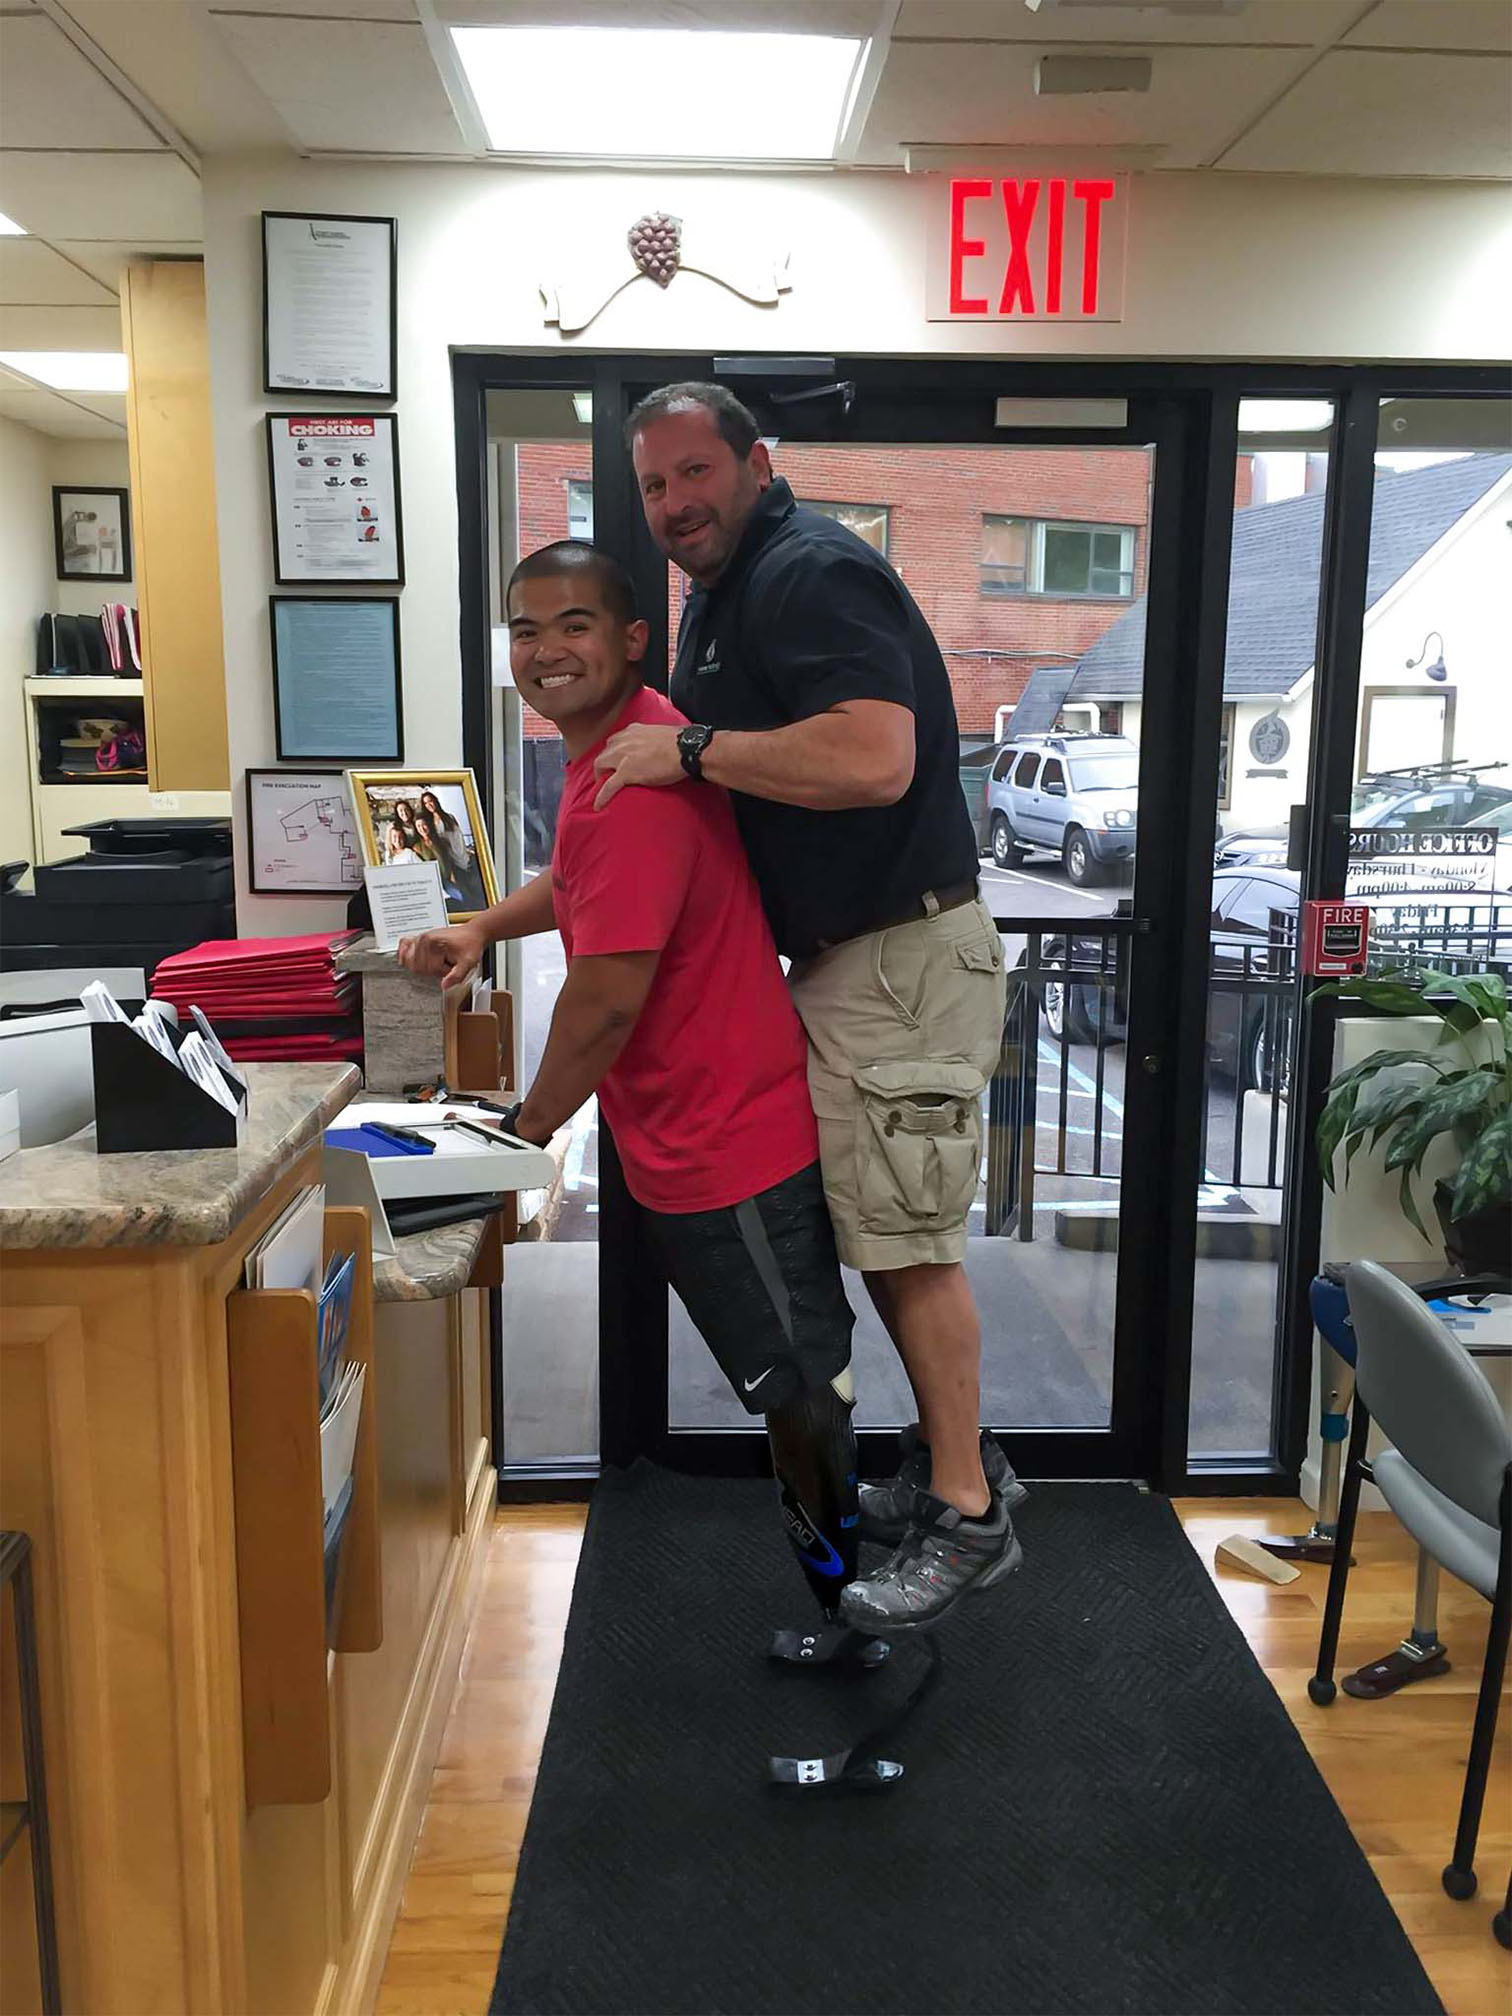 Prosthetist and patient fun at NY facility